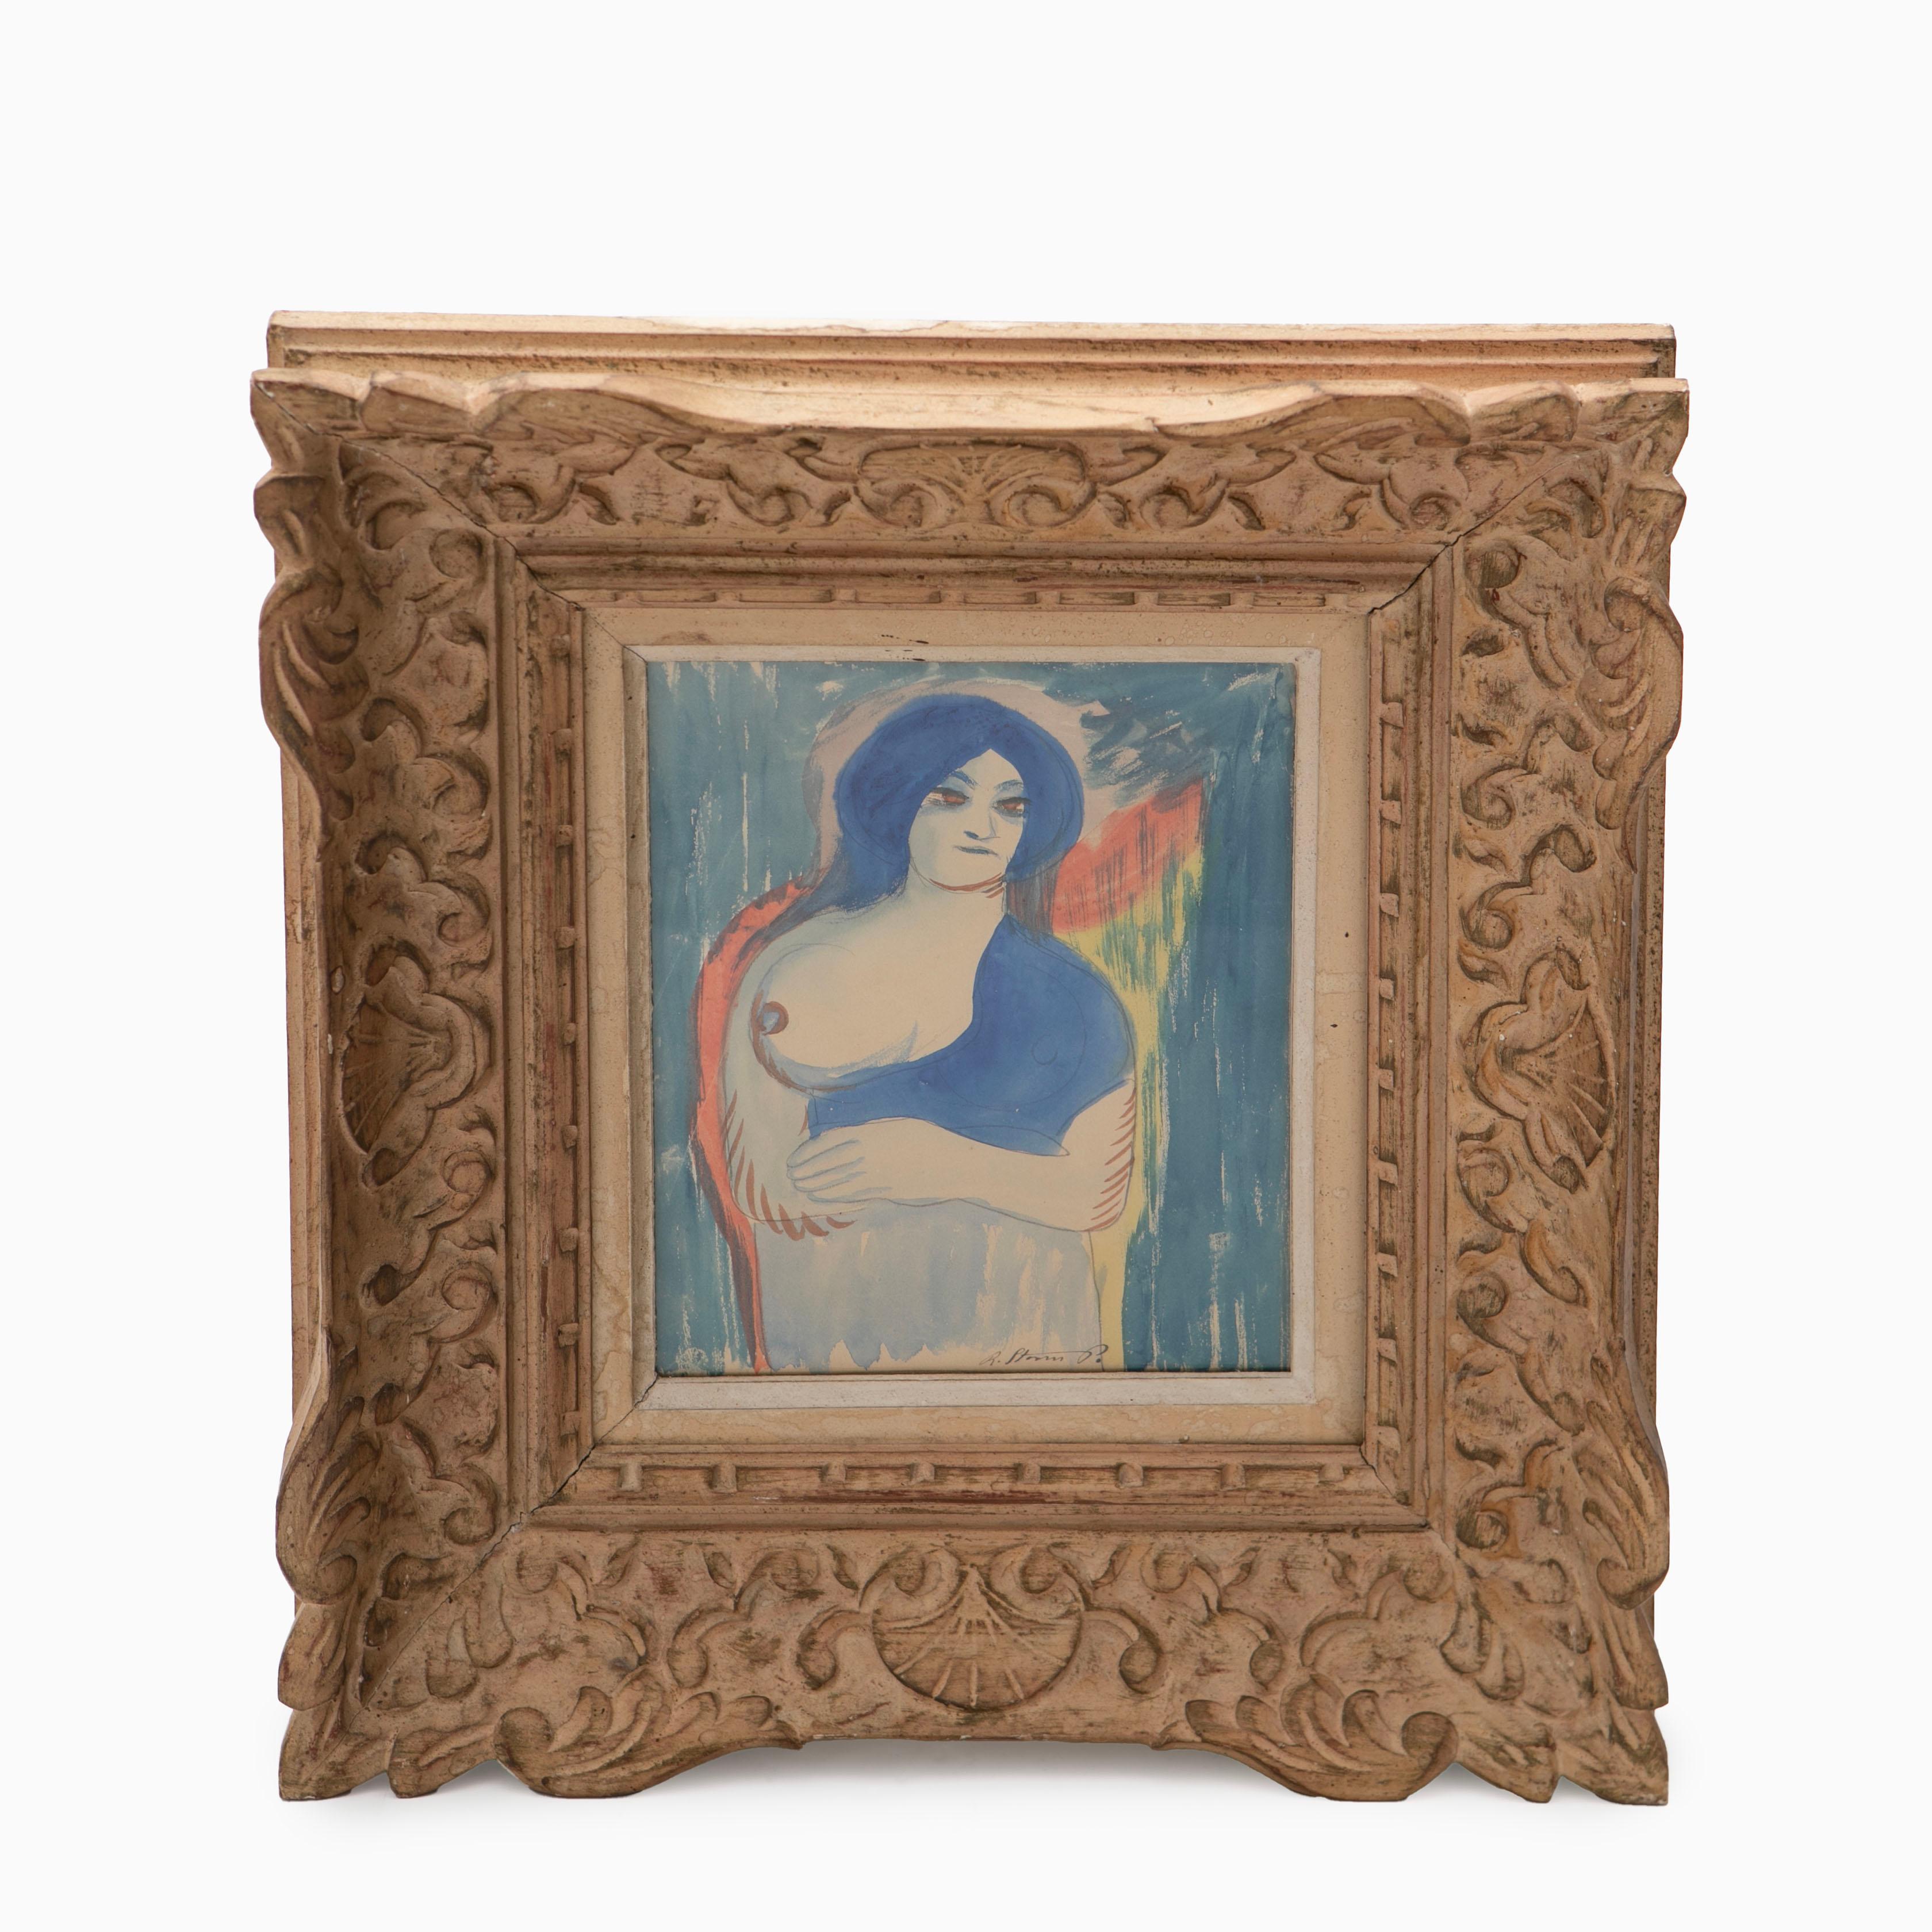 Robert Storm Petersen, Danish 1882-1949
Framed watercolor painting: 'Woman with exposed breast'.
Watercolor on paper. Framed in a contemporary wood-carved Montparnasse frame that compliments the picture well.
Sheet size: (cm): 26x21  Frame (cm):